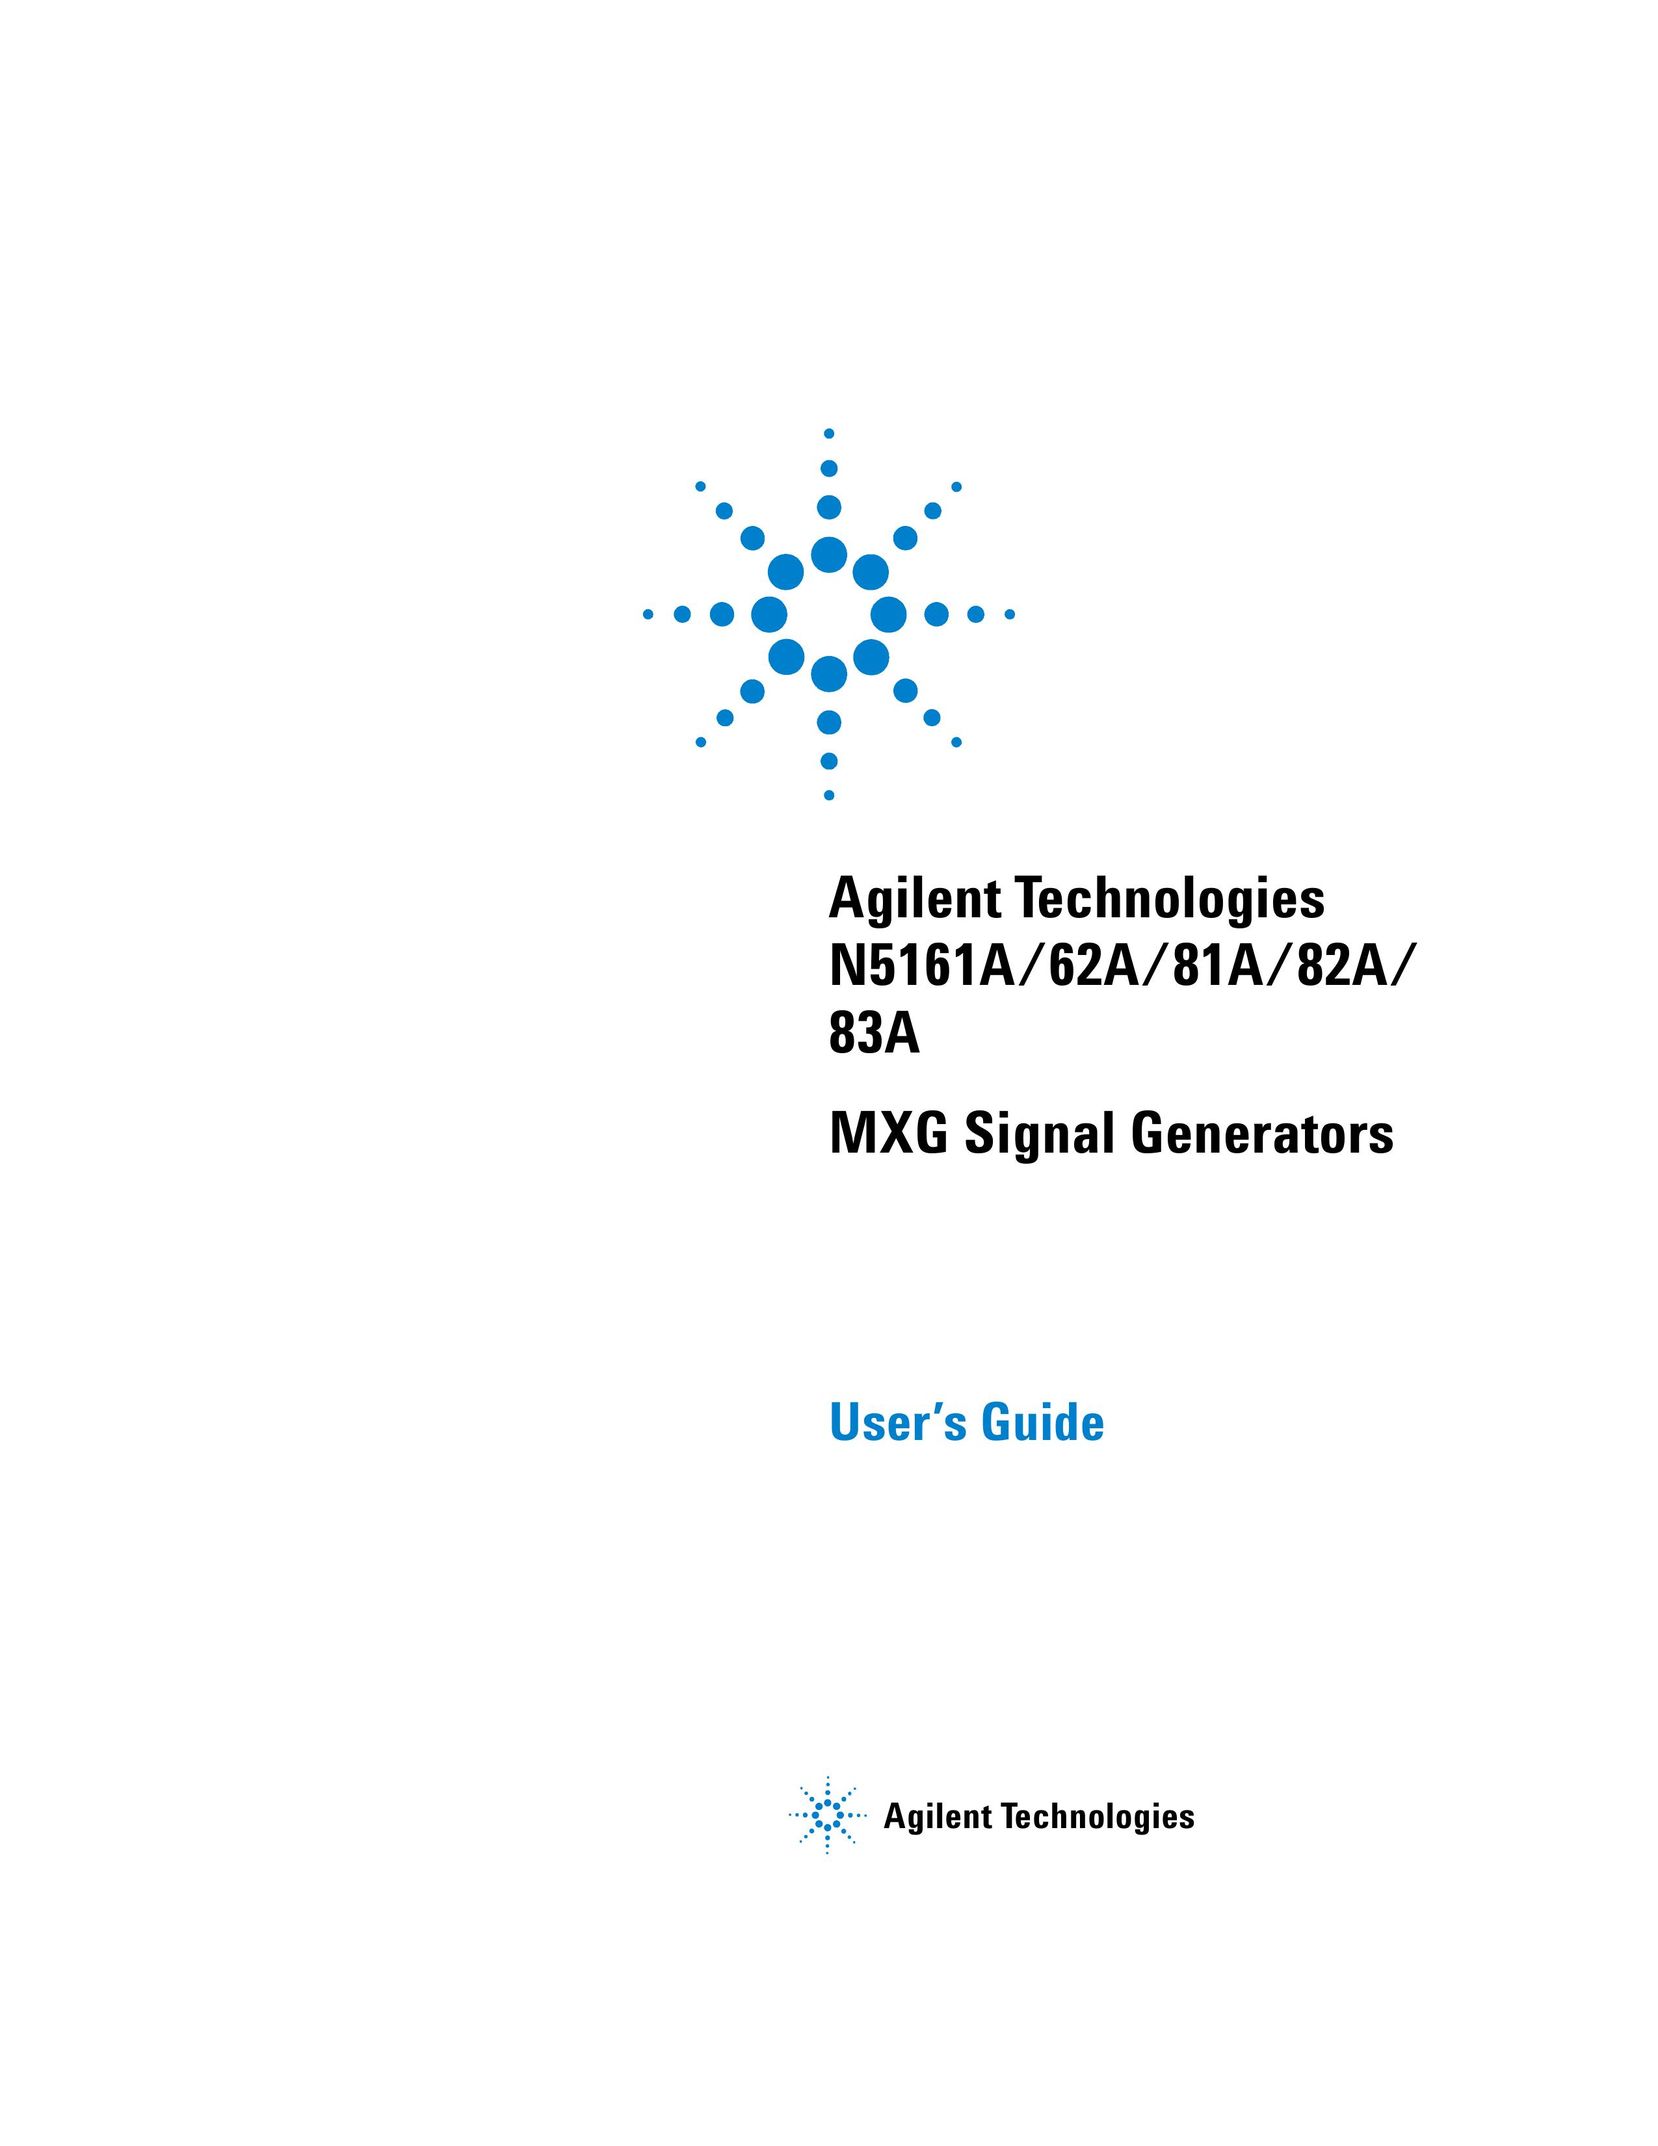 Agilent Technologies N5161A Stereo System User Manual